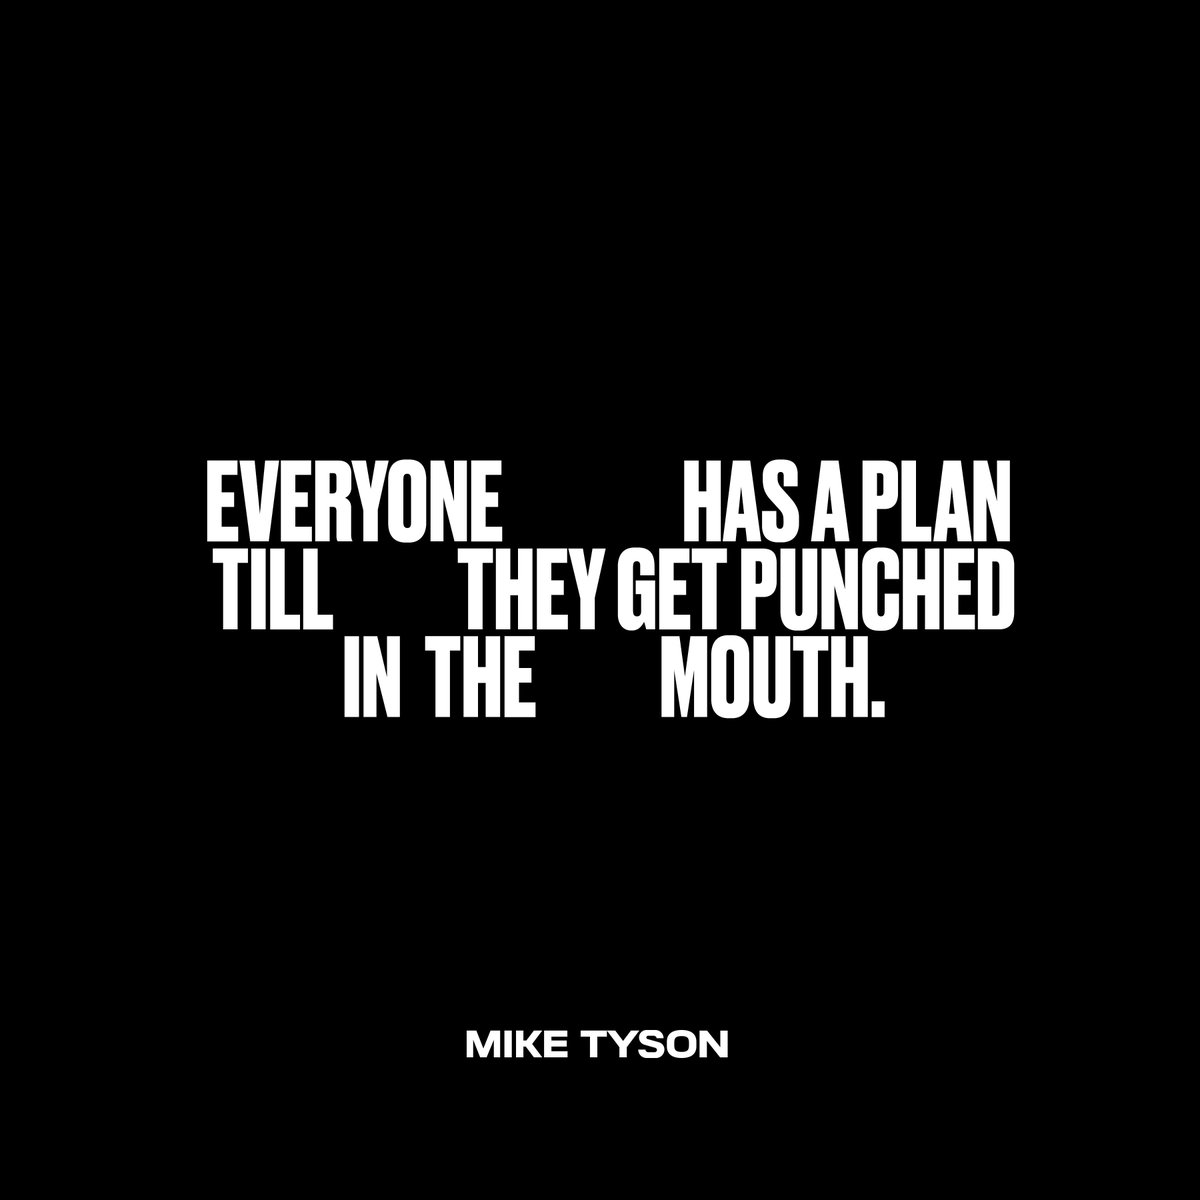 Mike Tyson Everyone Has A Plan Till They Get Punched In The Mouth Miketyson Vintagetyson T Co Yjghgqxrkk Twitter